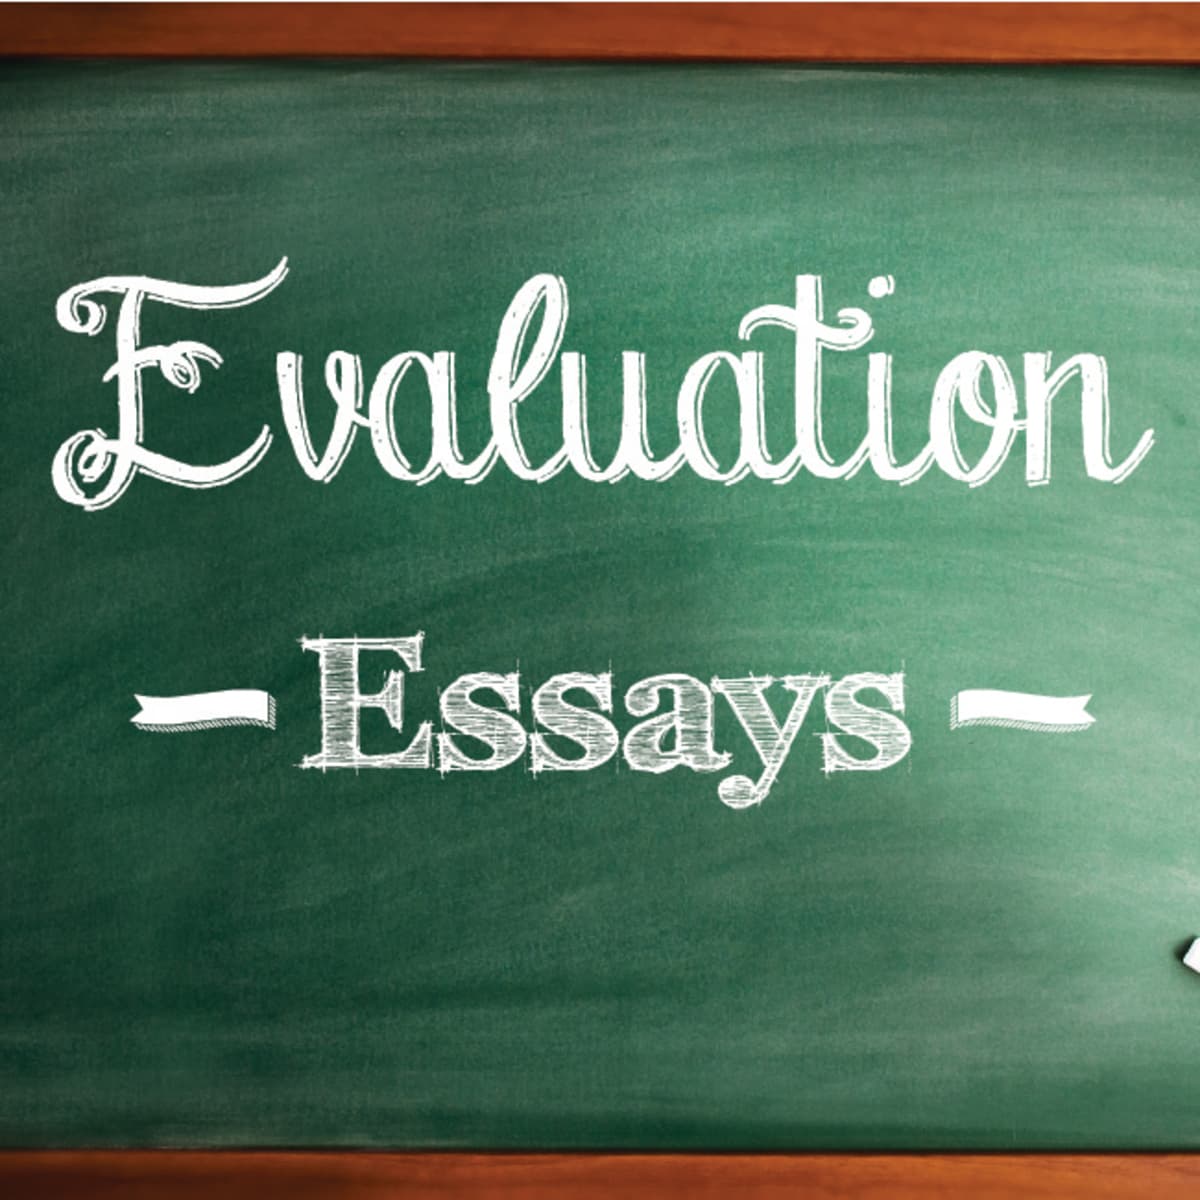 how to start an evaluation essay example